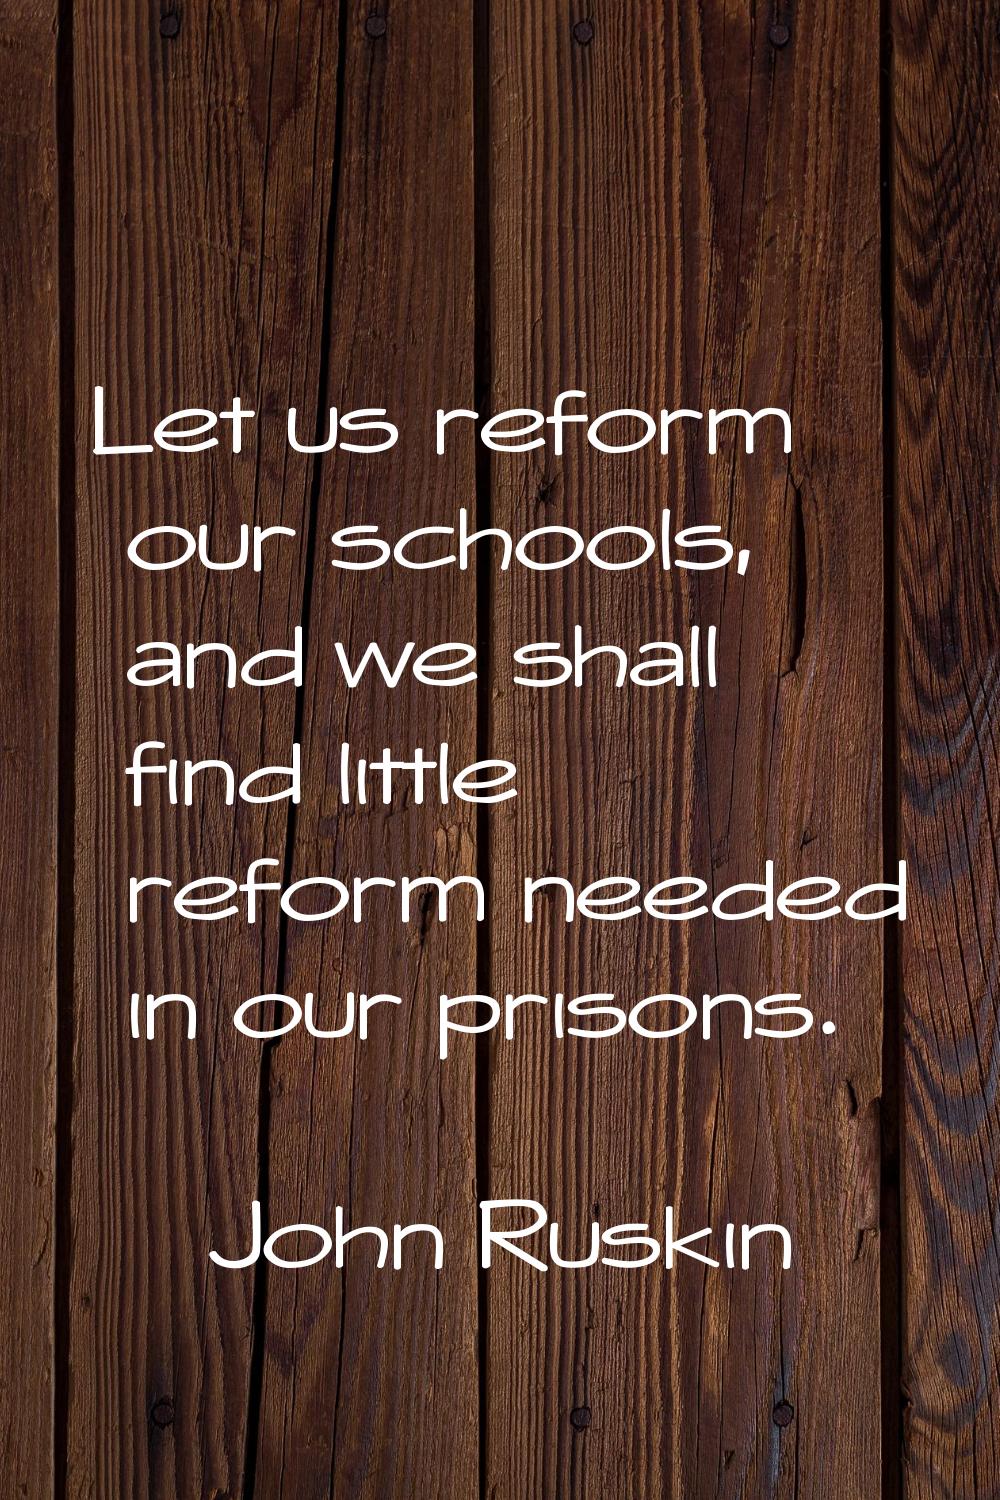 Let us reform our schools, and we shall find little reform needed in our prisons.